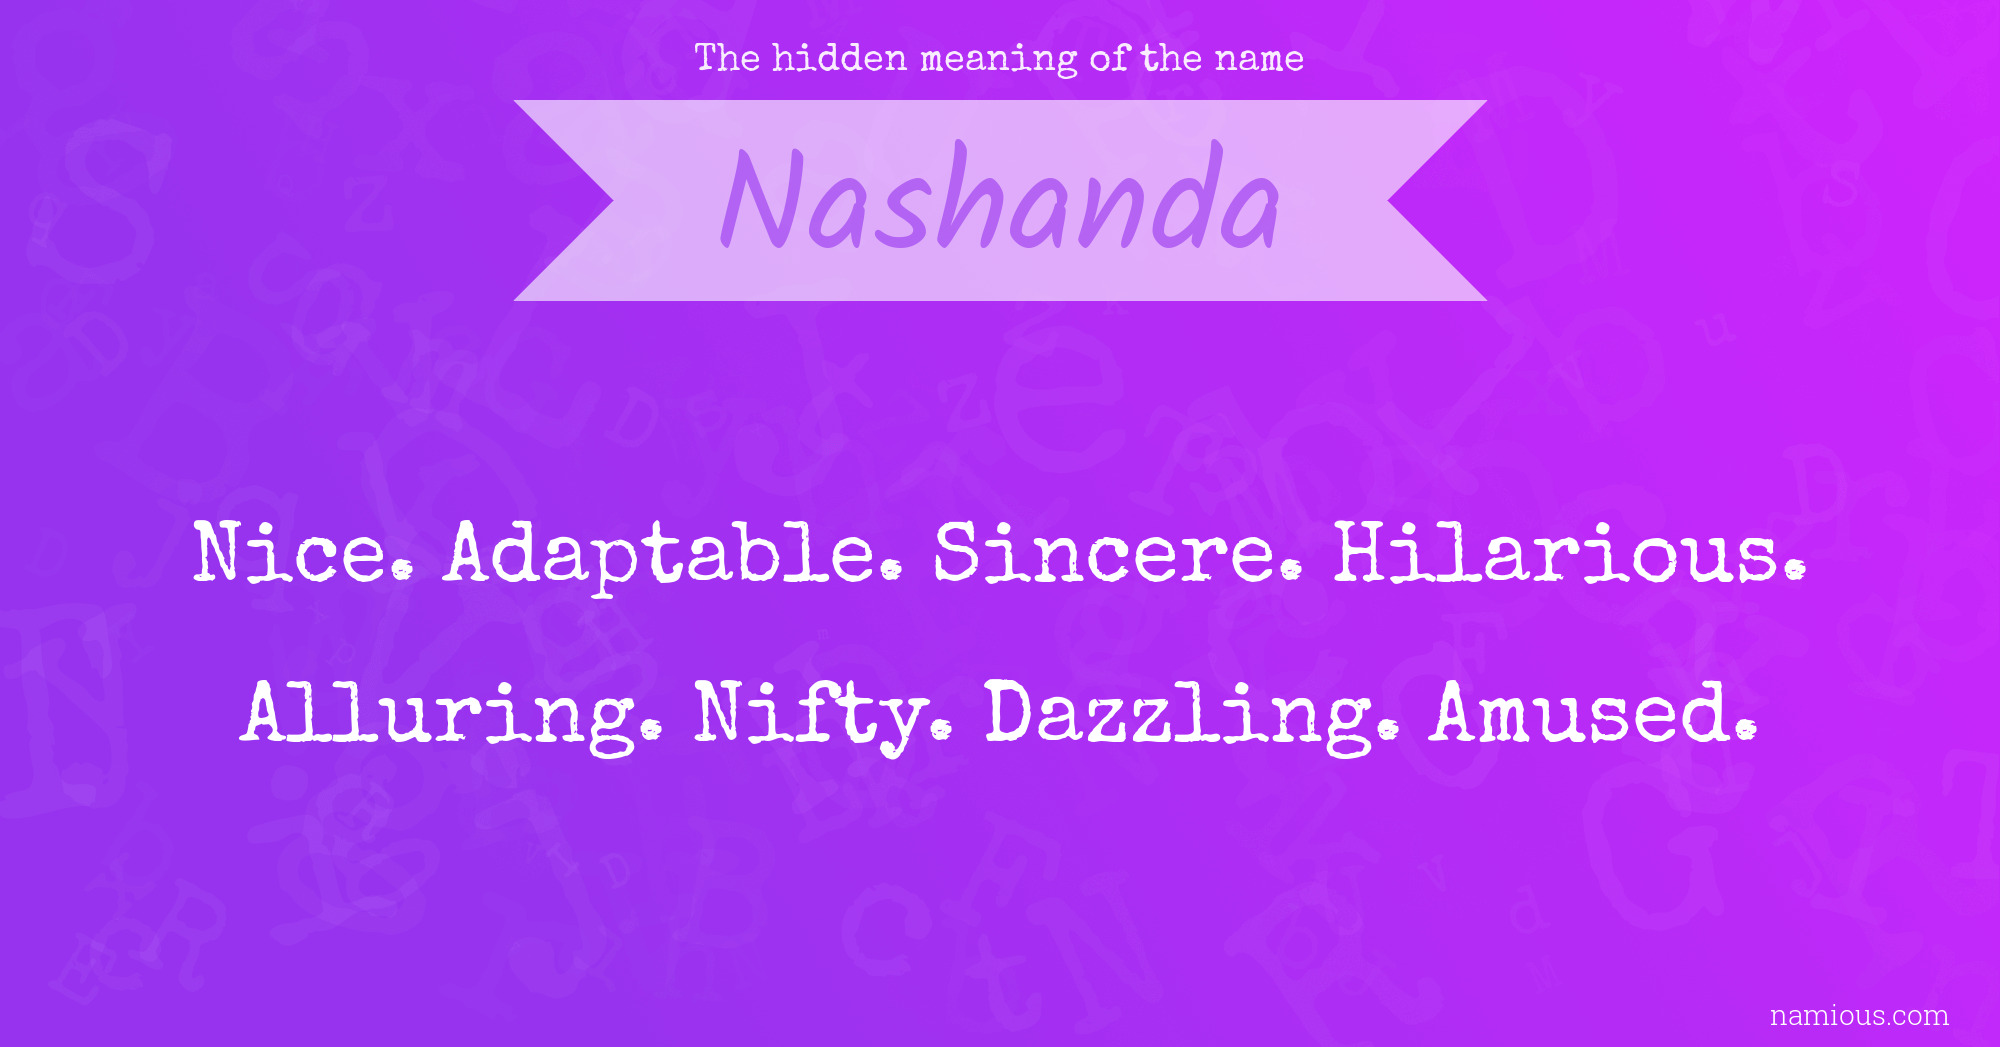 The hidden meaning of the name Nashanda